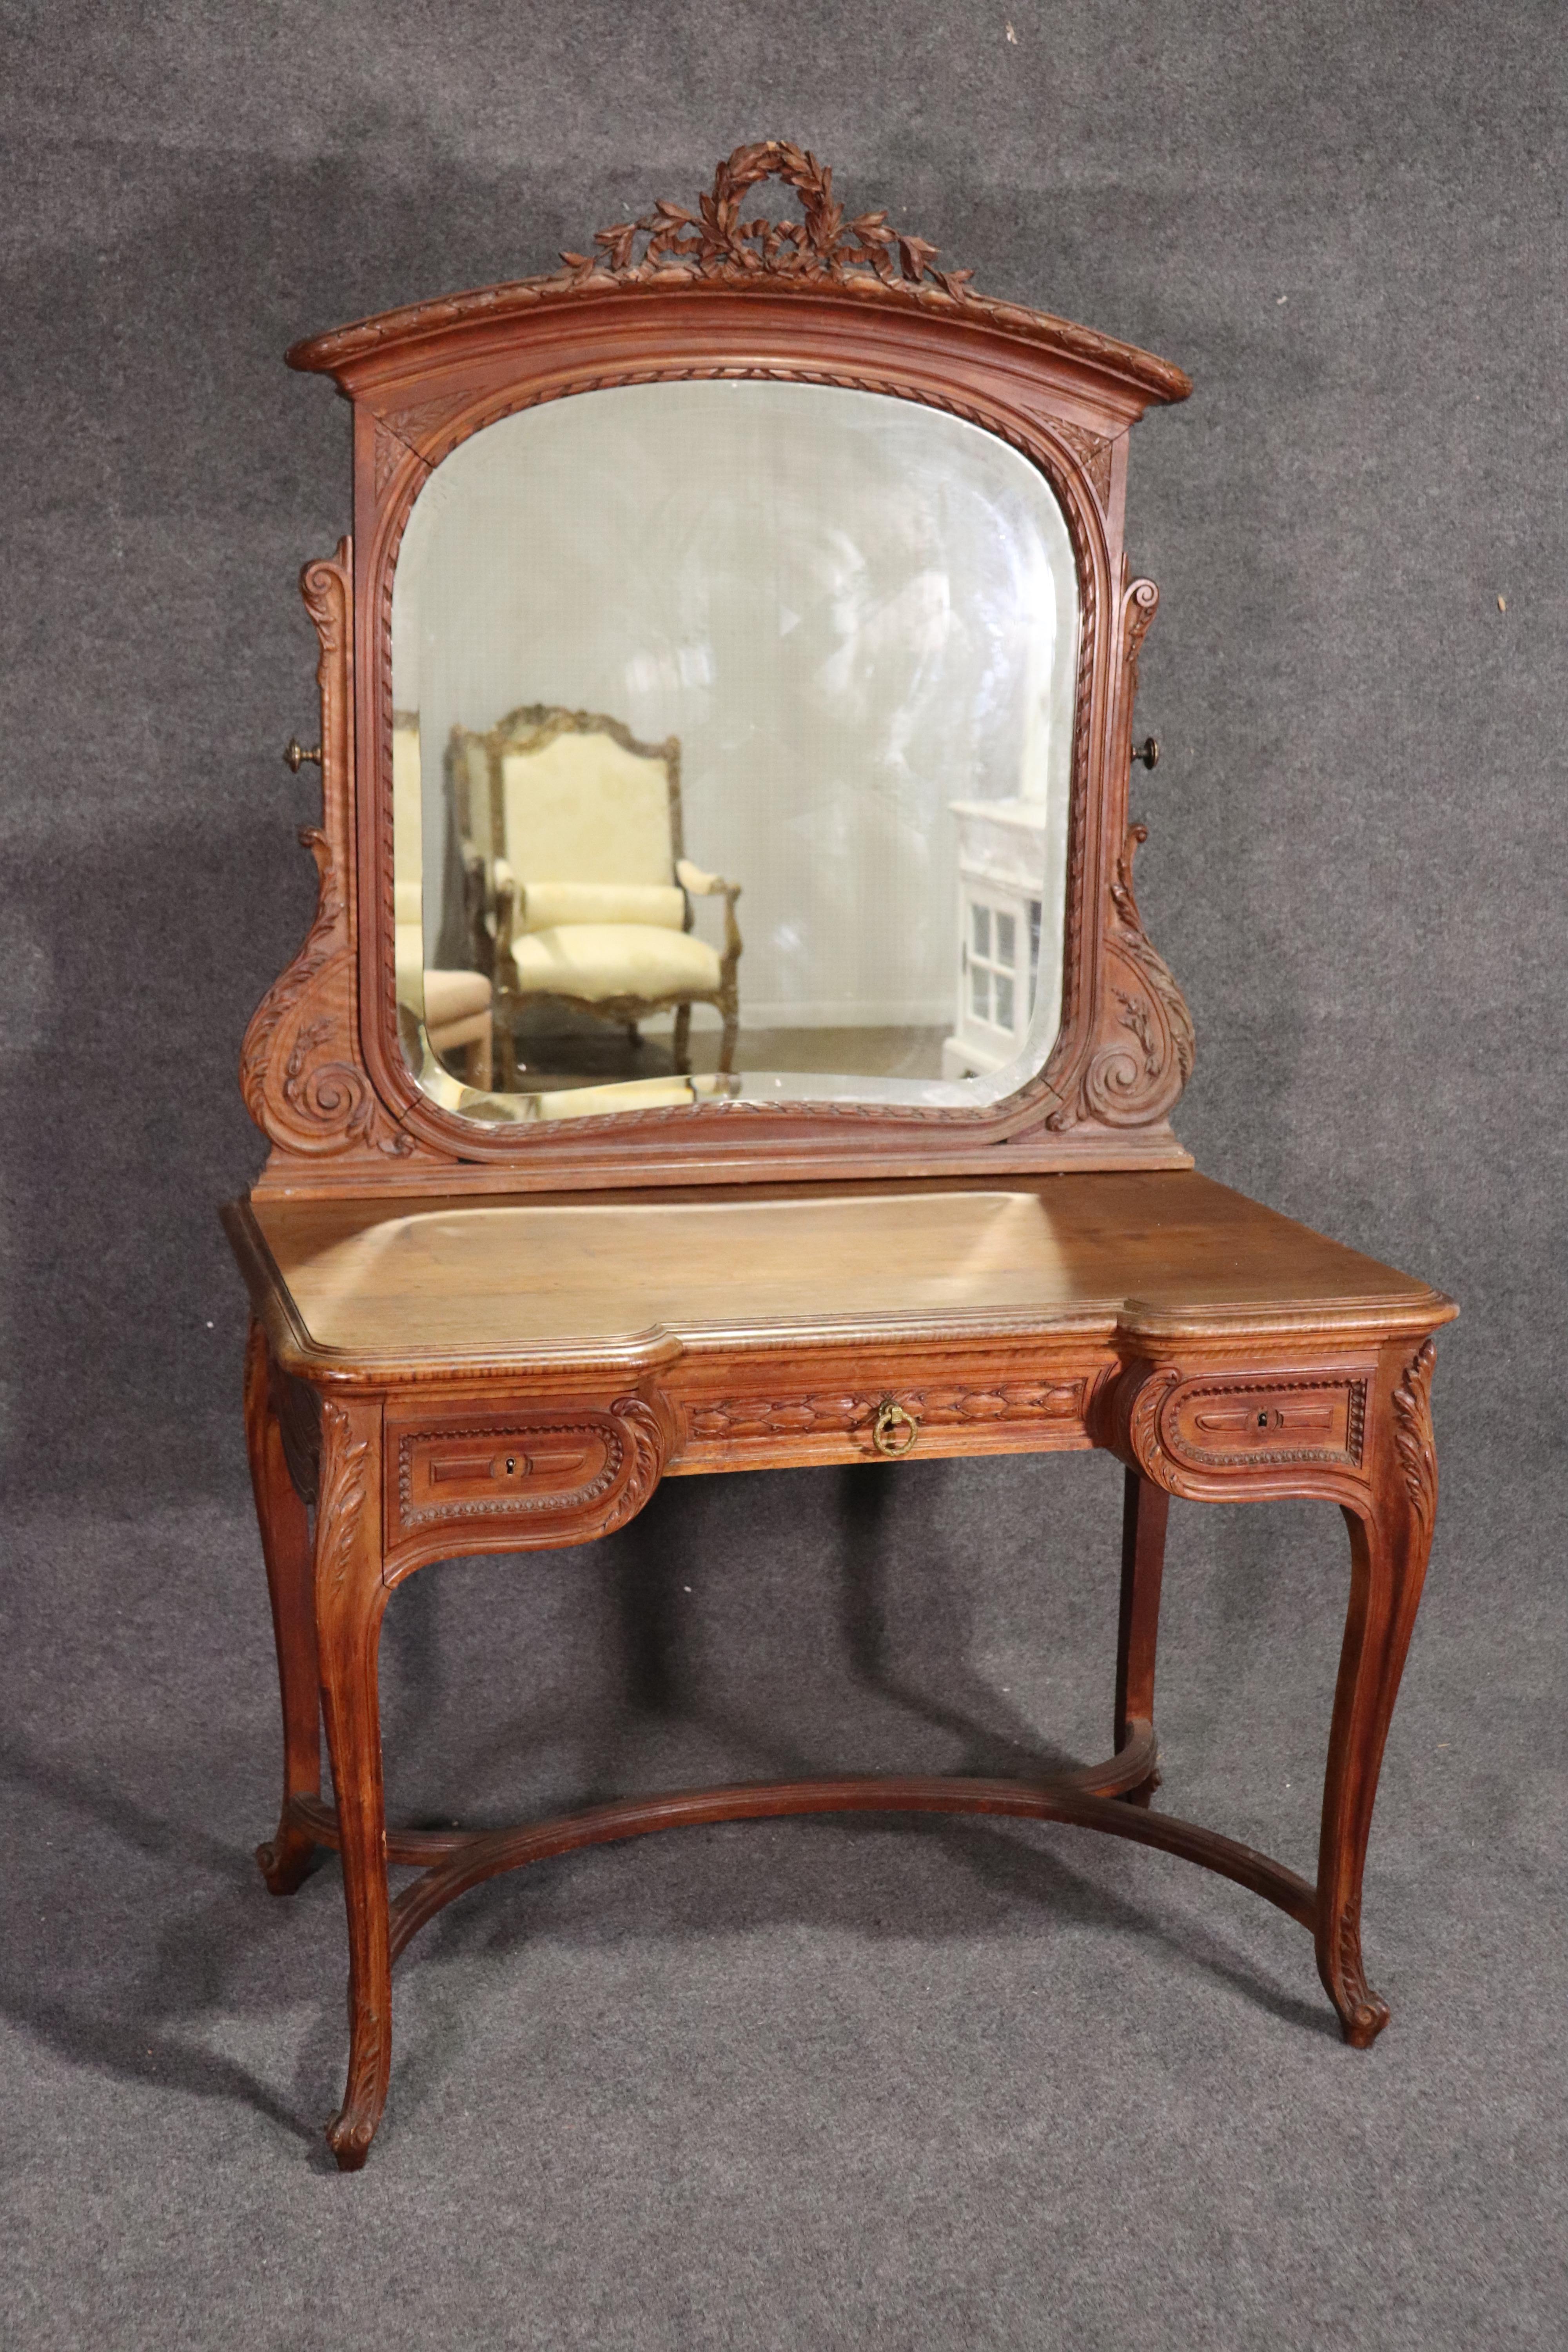 This is a gorgeous carved walnut ladies vanity made in France during the 1920s. It measures 72 tall x 43 wide x 26 deep.